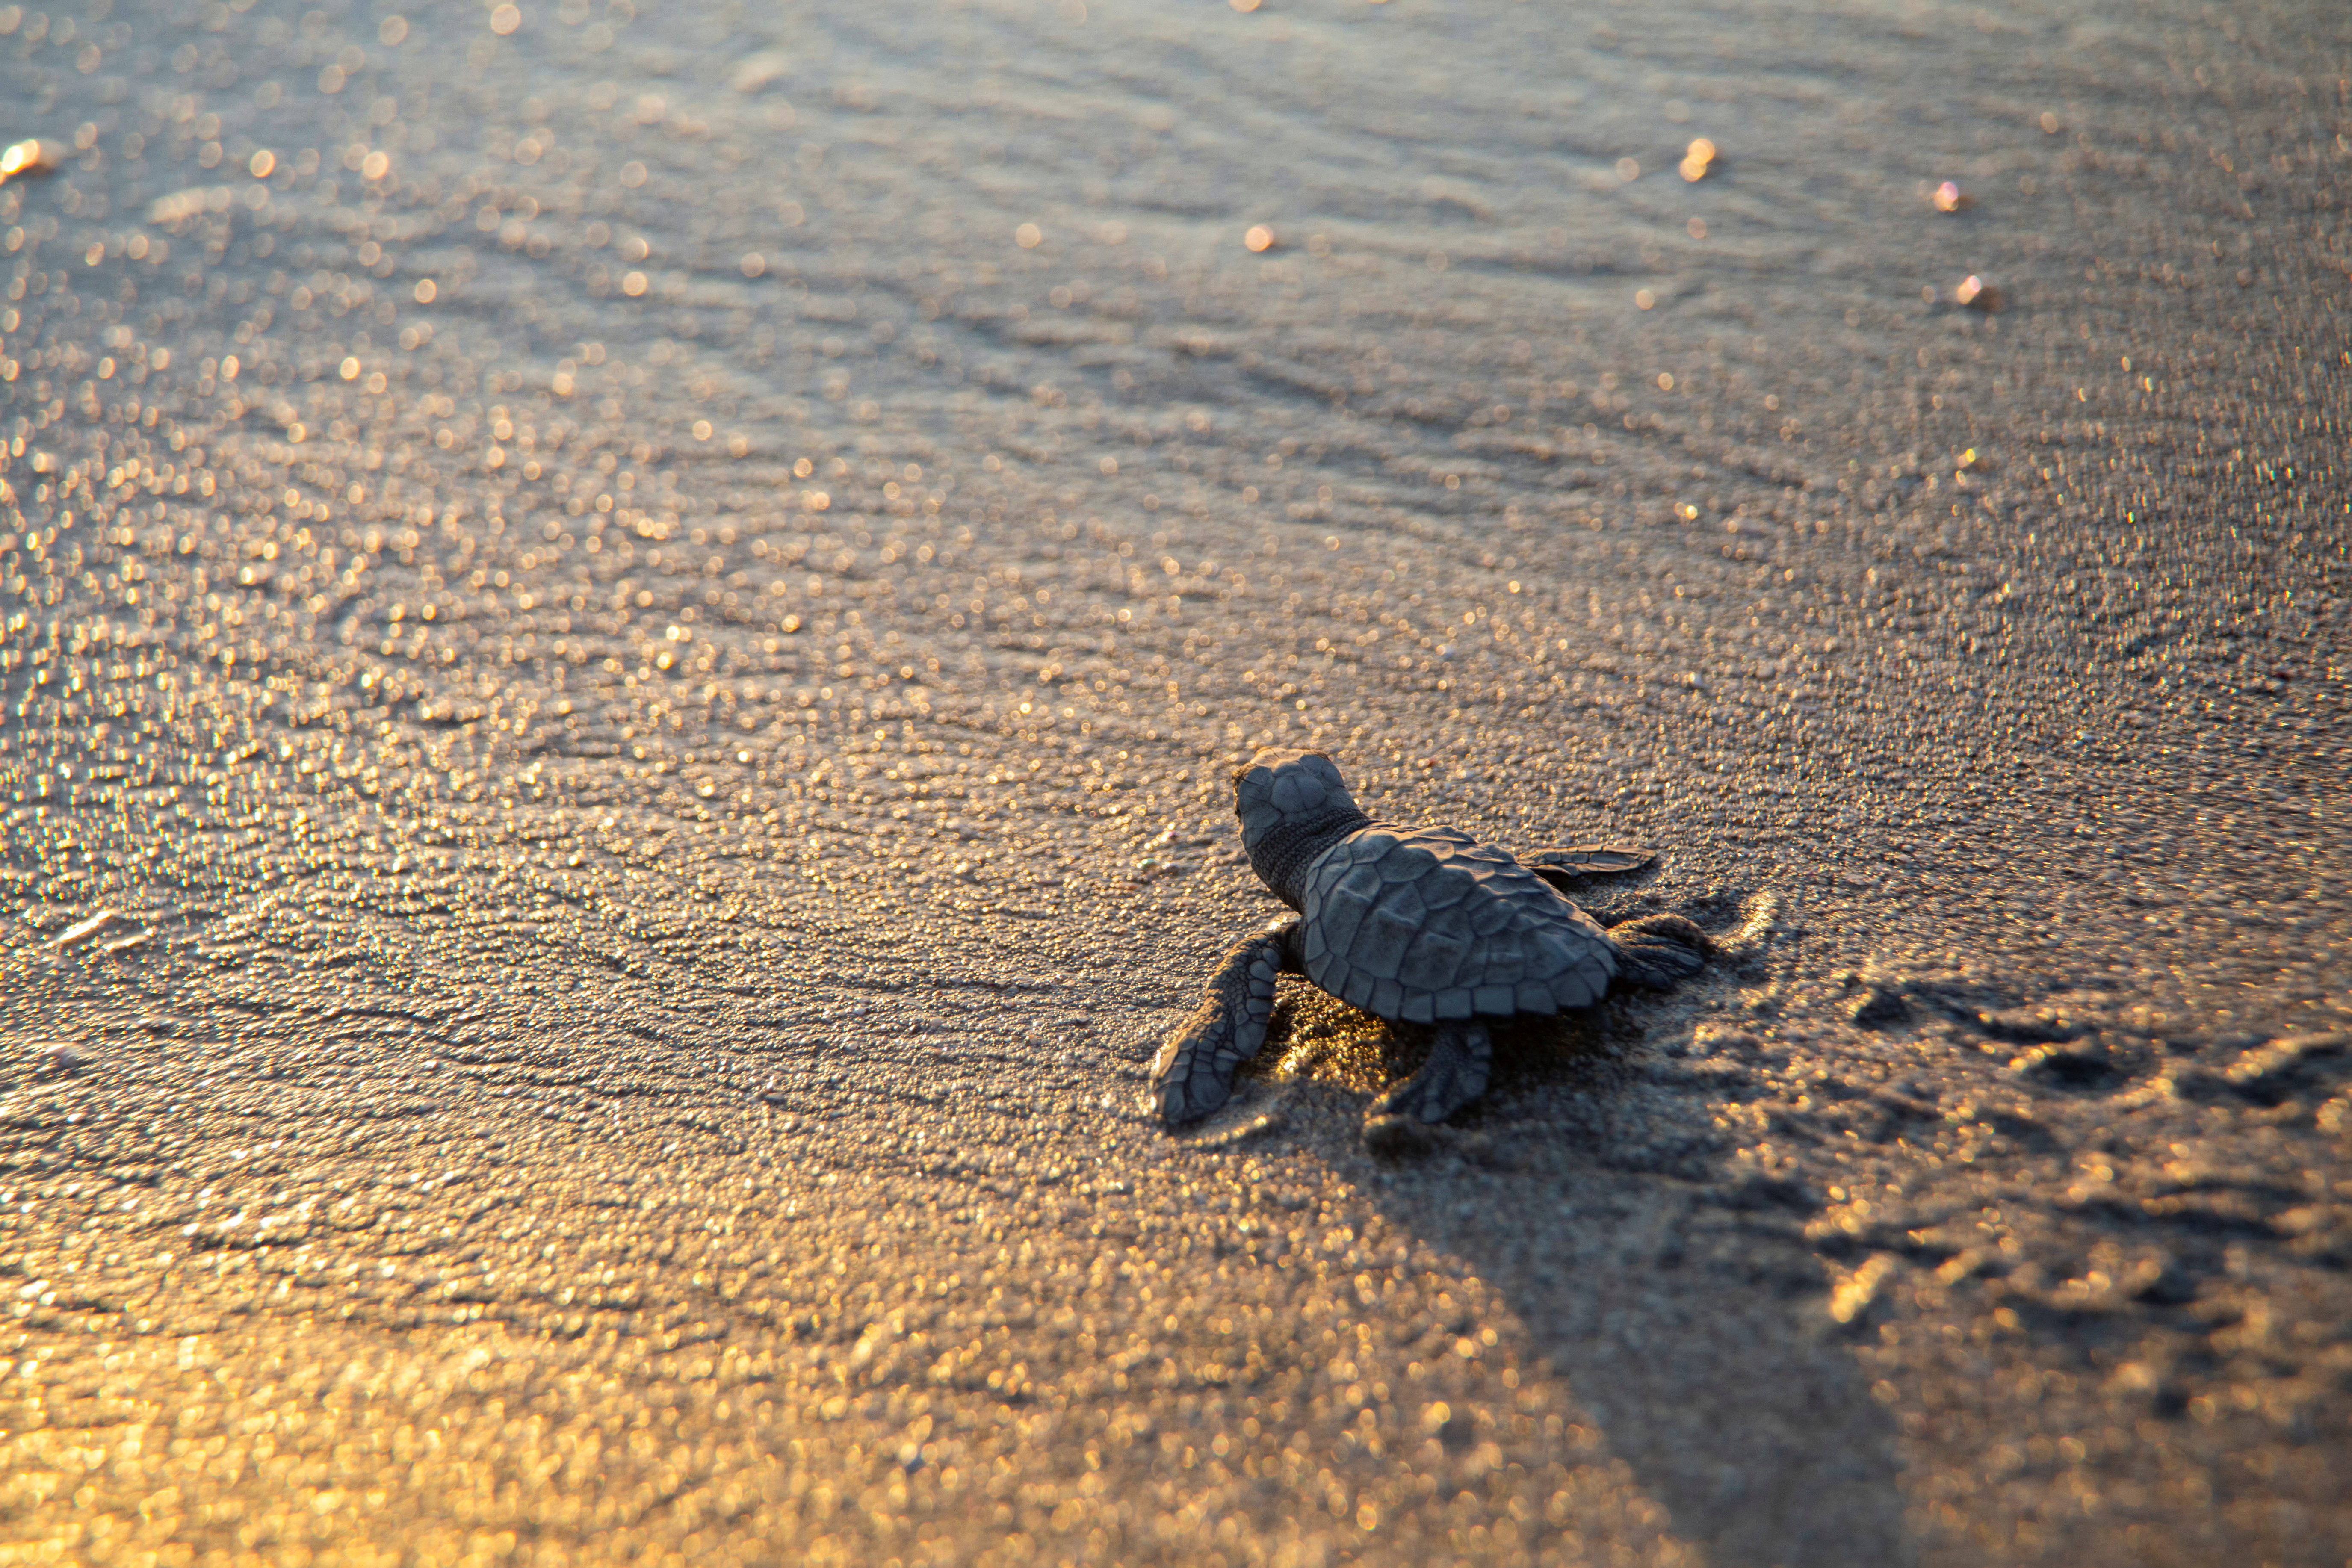 Hundreds of baby sea turtles released off coast of Nicaragua in  conservation effort